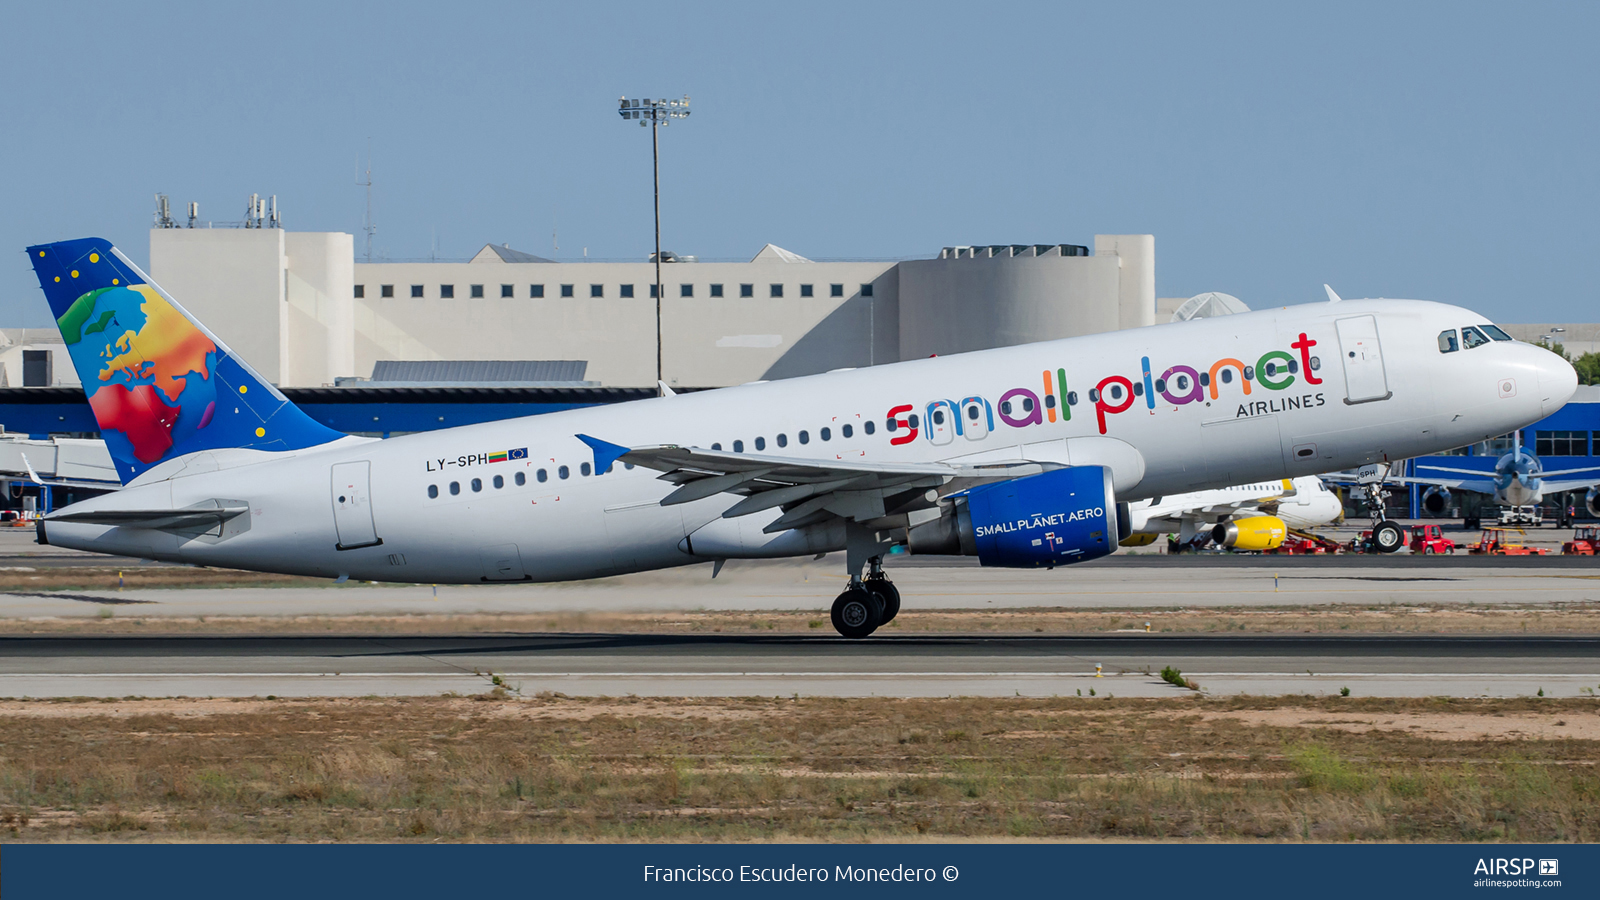 Small Planet Airlines  Airbus A320  LY-SPH